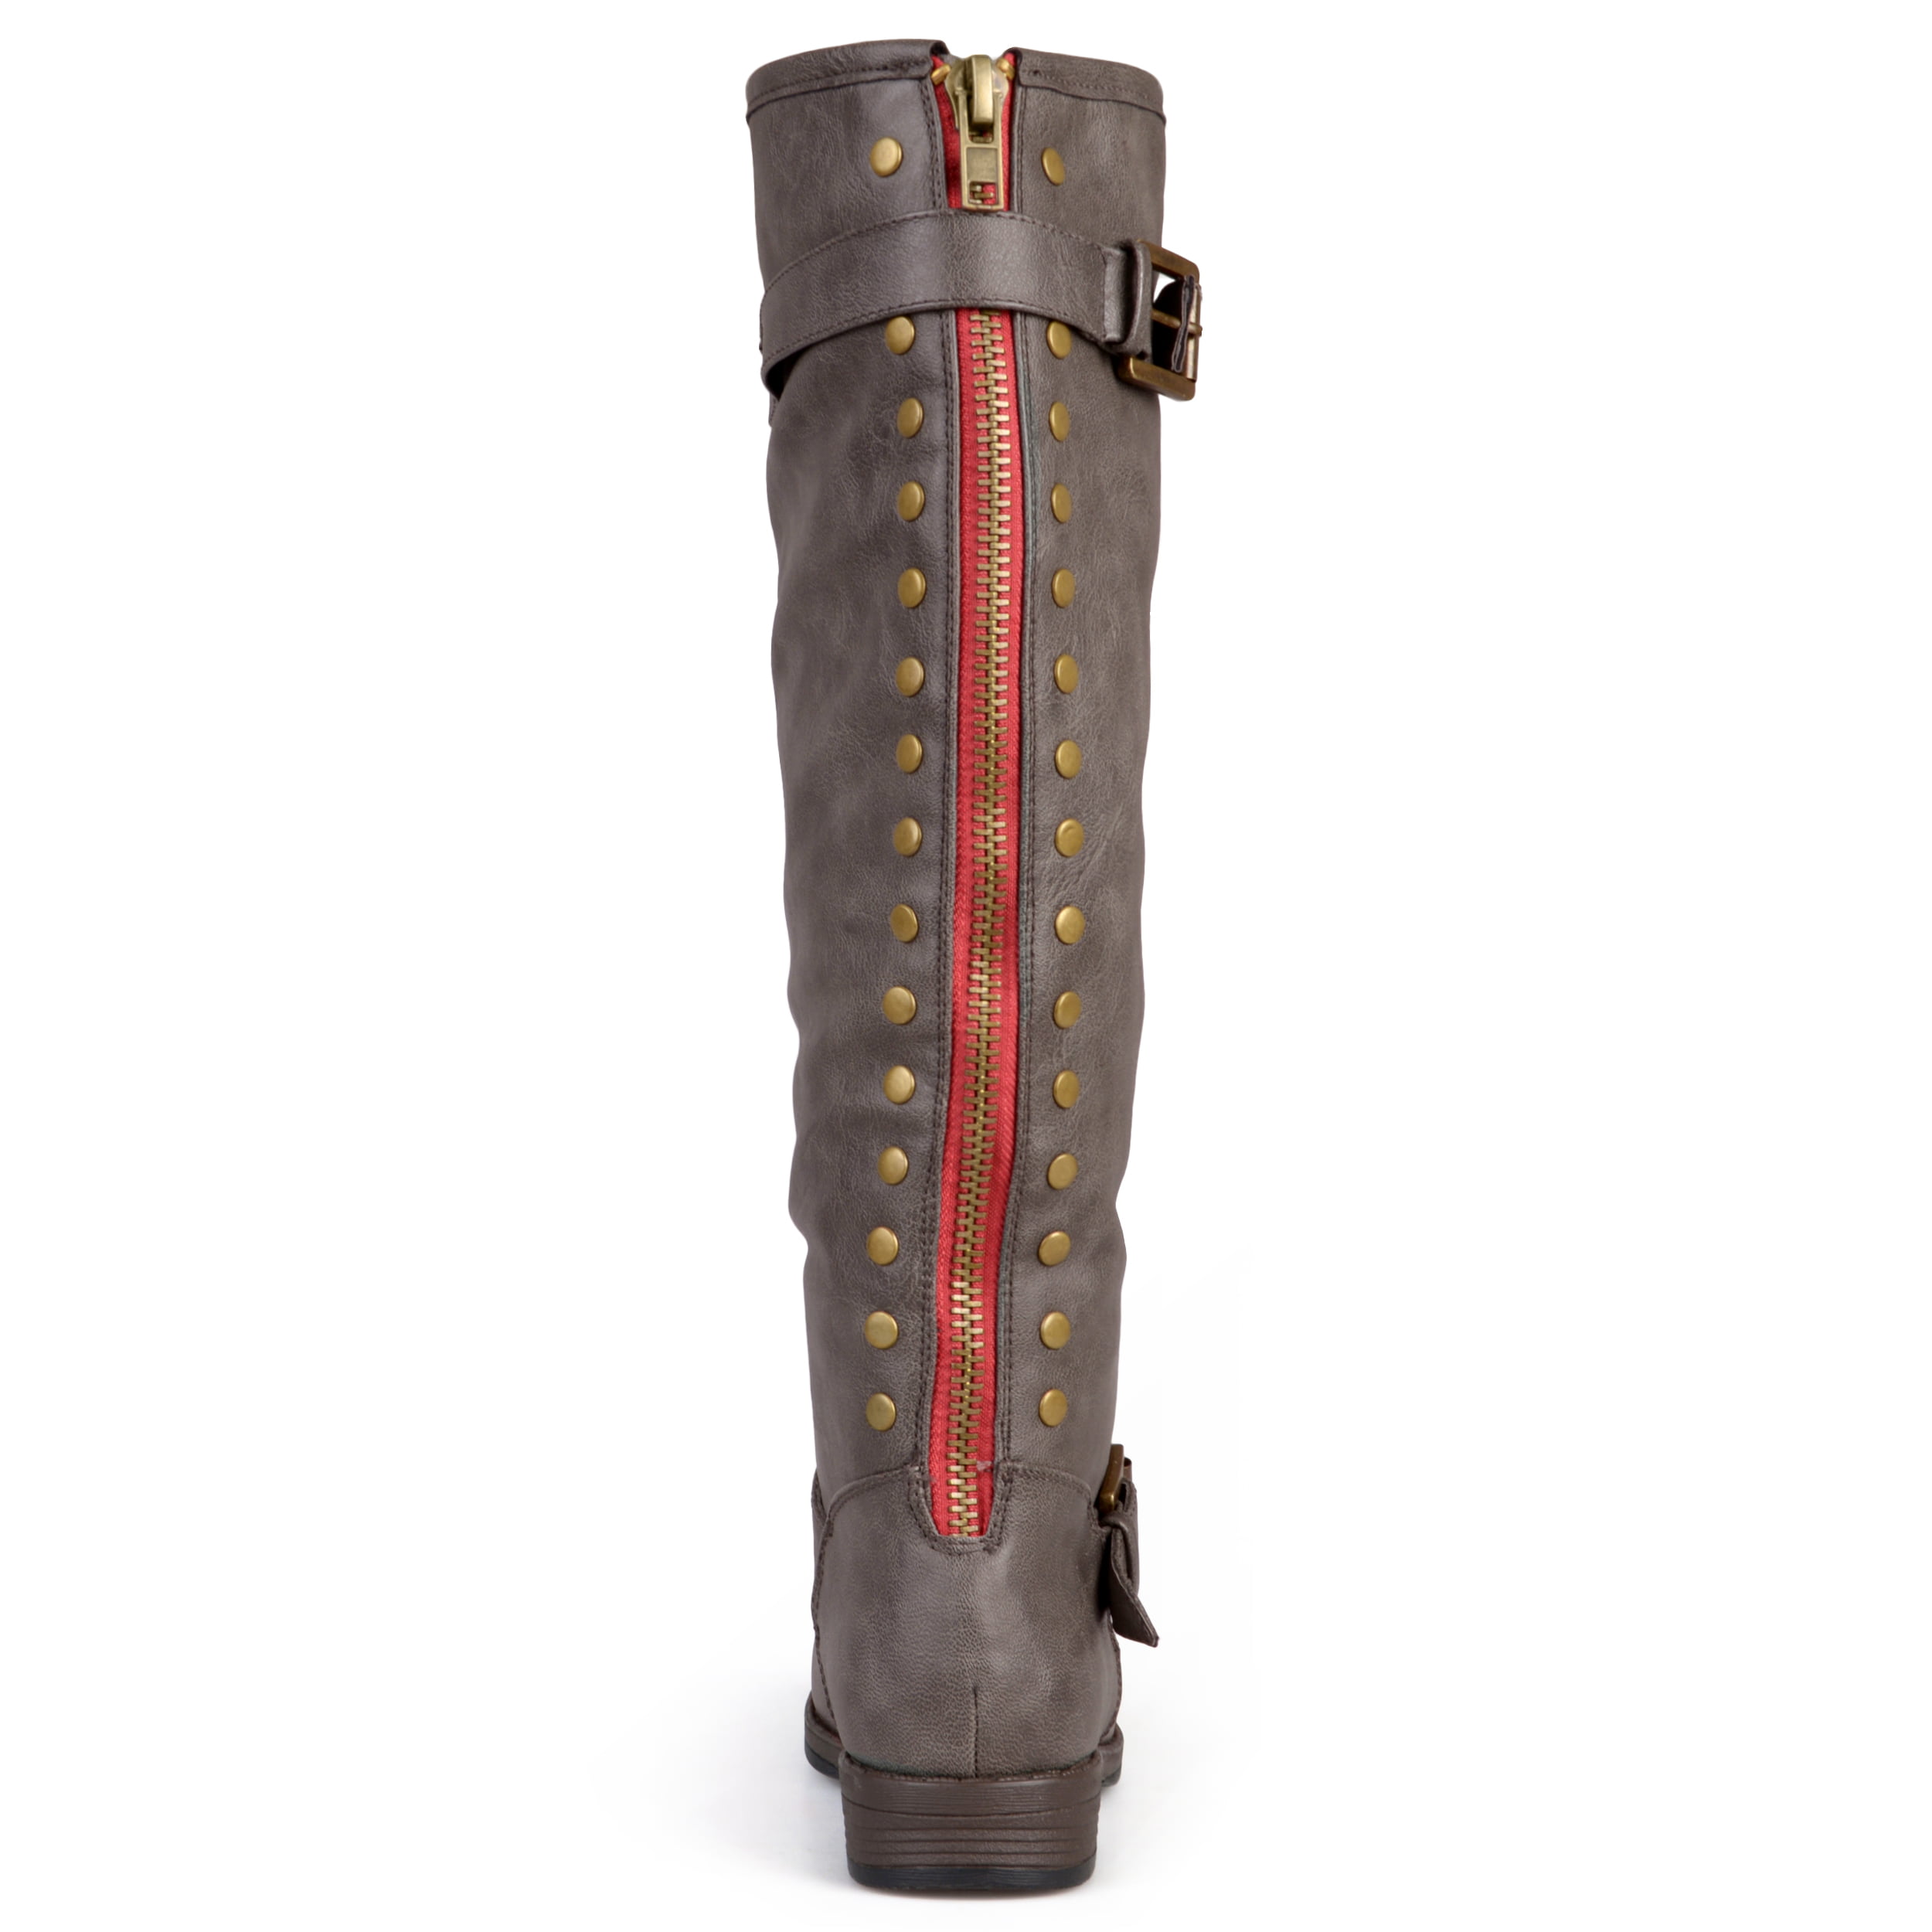 Brinley Co. Womens Extra Wide-Calf Mid-Calf Slouch Riding Boots